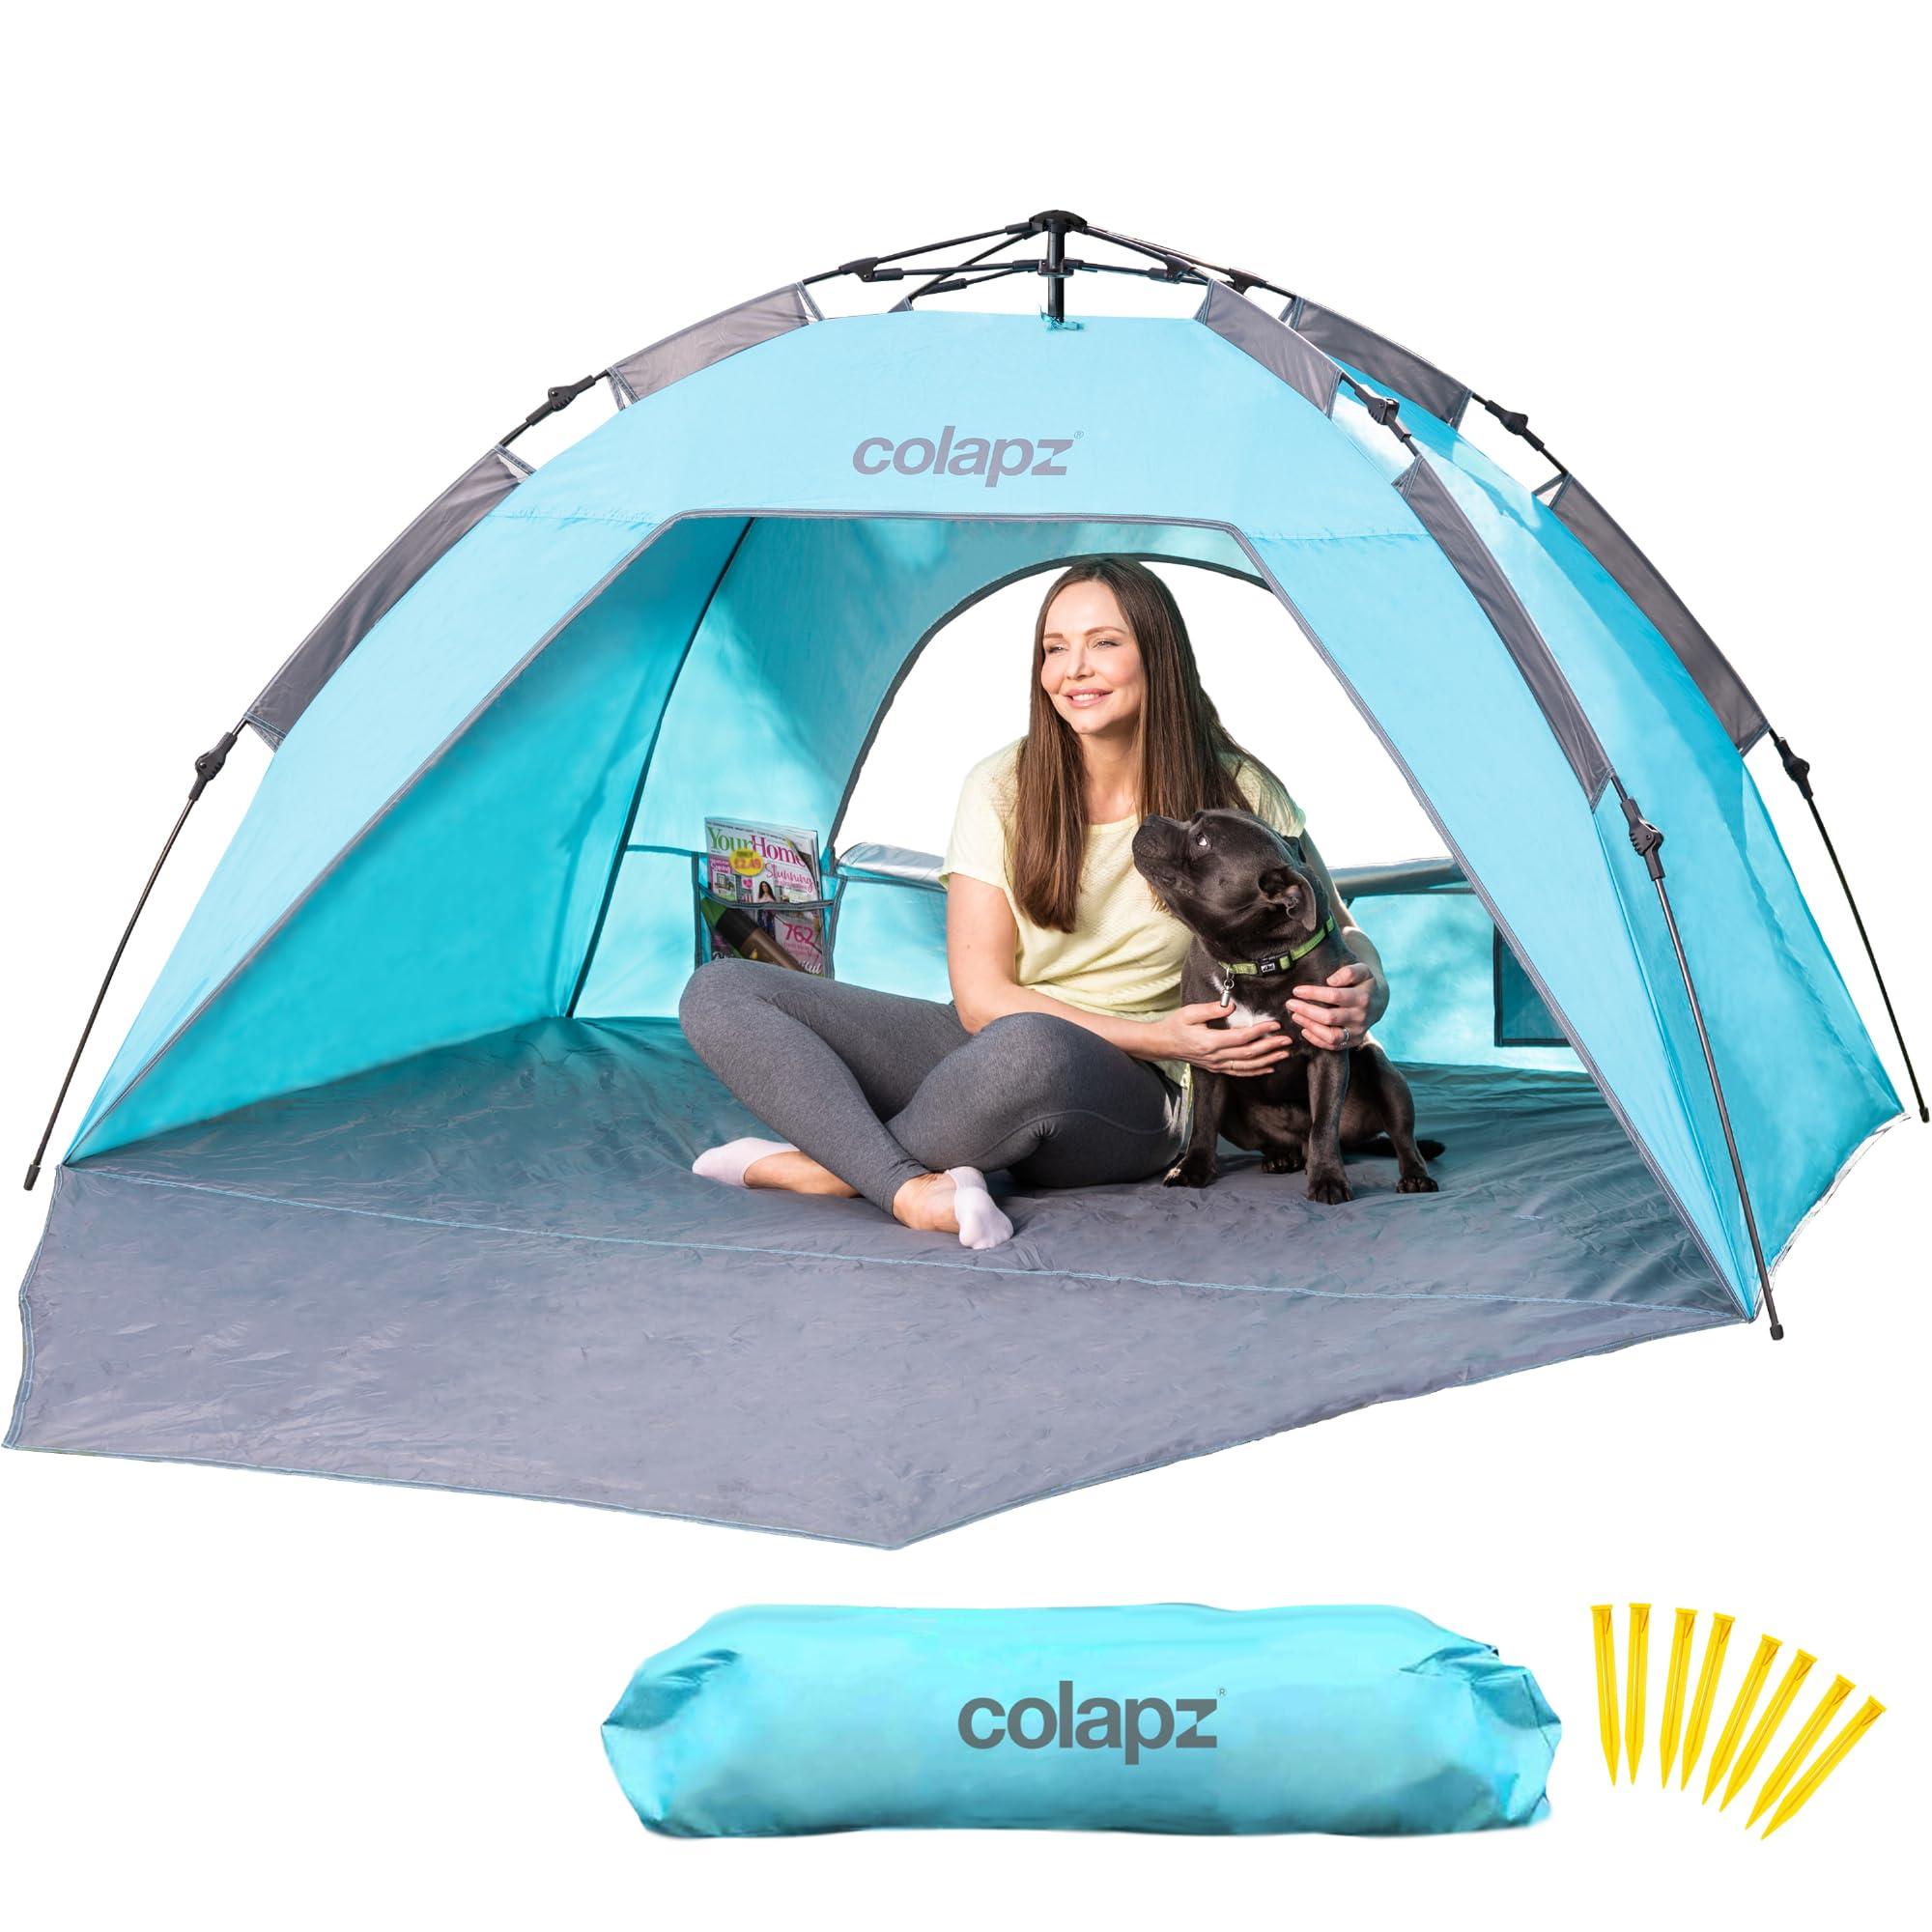 Colapz Pop Up Tent. Luxury Beach Tent. SPF50+ Beach Tents Shelters for Adults. Protective Baby Beach Tent. Easy To Use Pop Up Tents. Portable Wind Breaker, Beach & Sun Shelters. Baby Sun Shade Tent